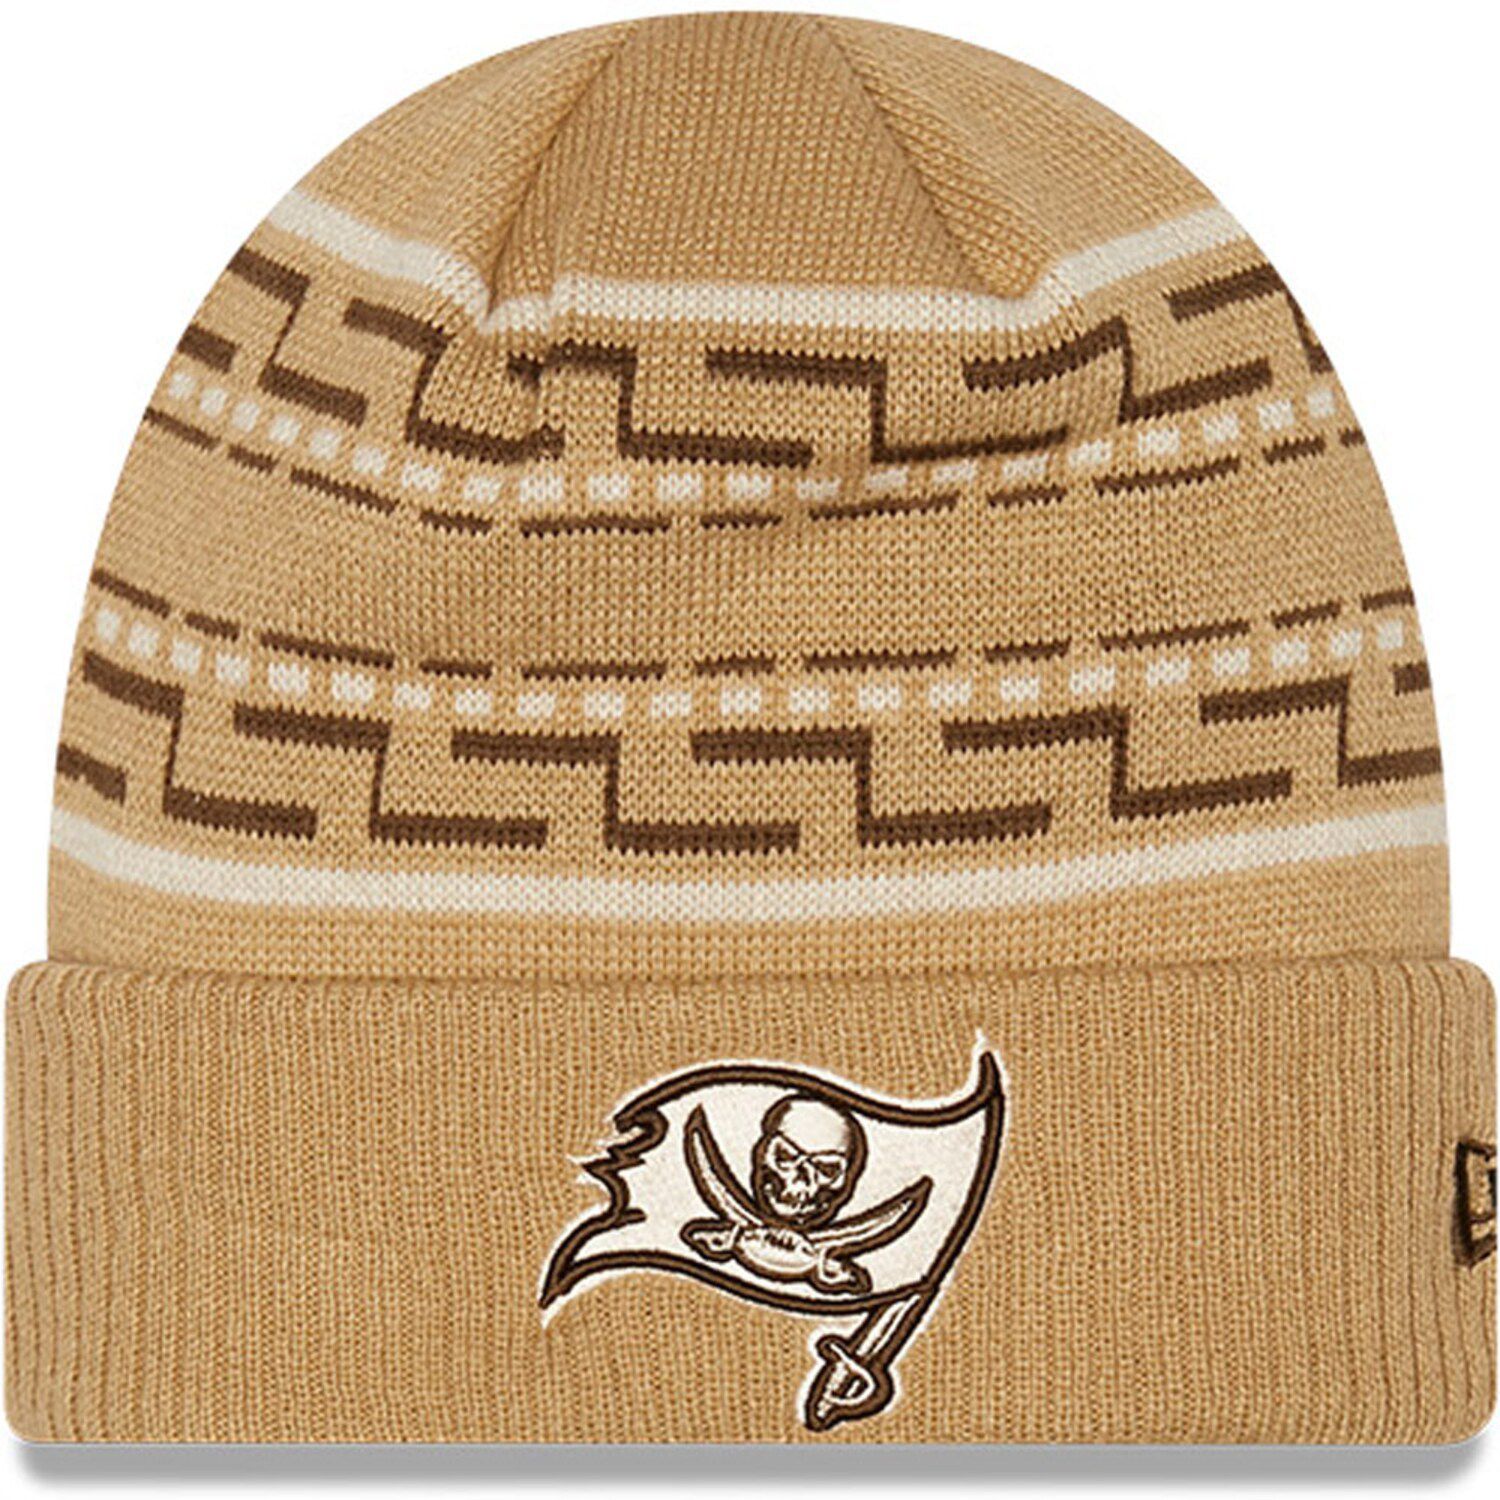 Tampa Bay Buccaneers knit hat